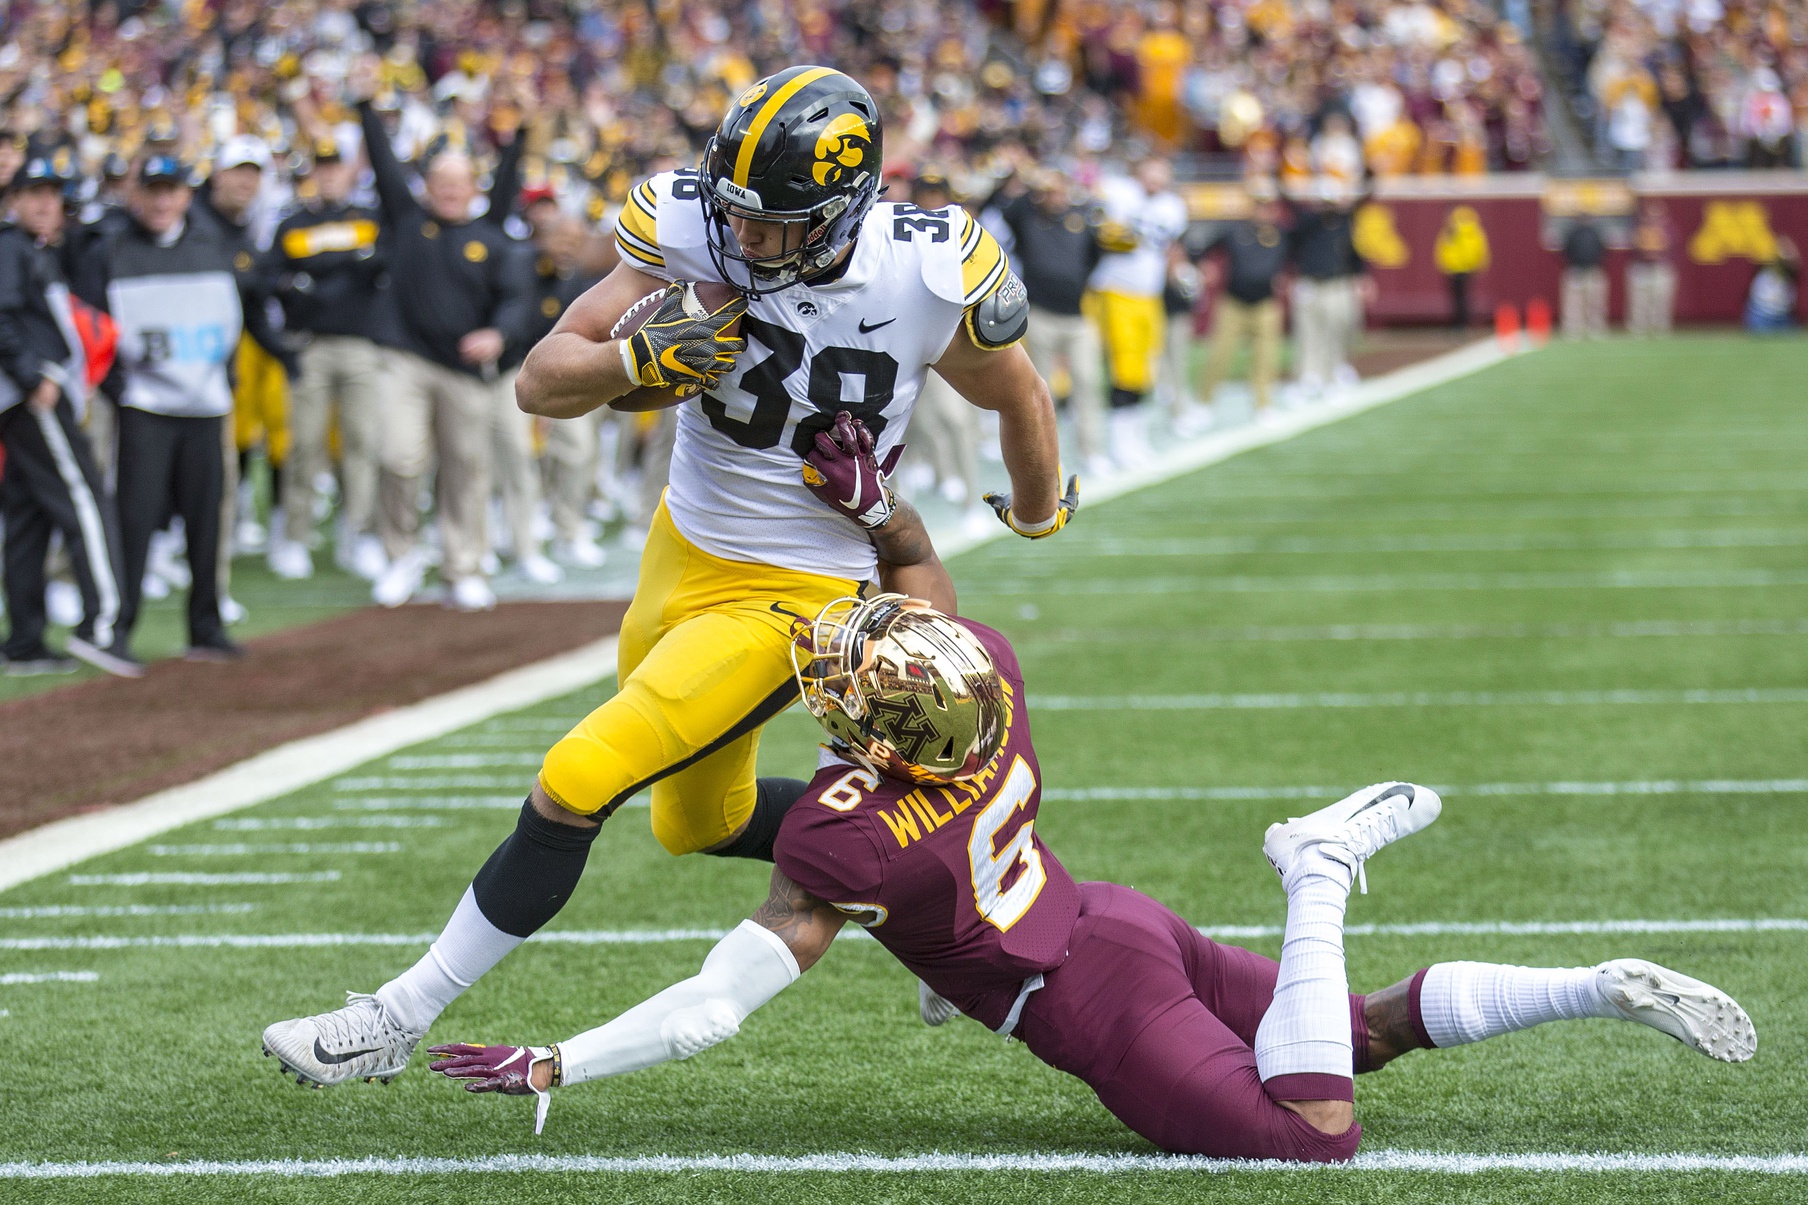 WATCH: Iowa lines up for FG, pulls off crazy trick-play TD